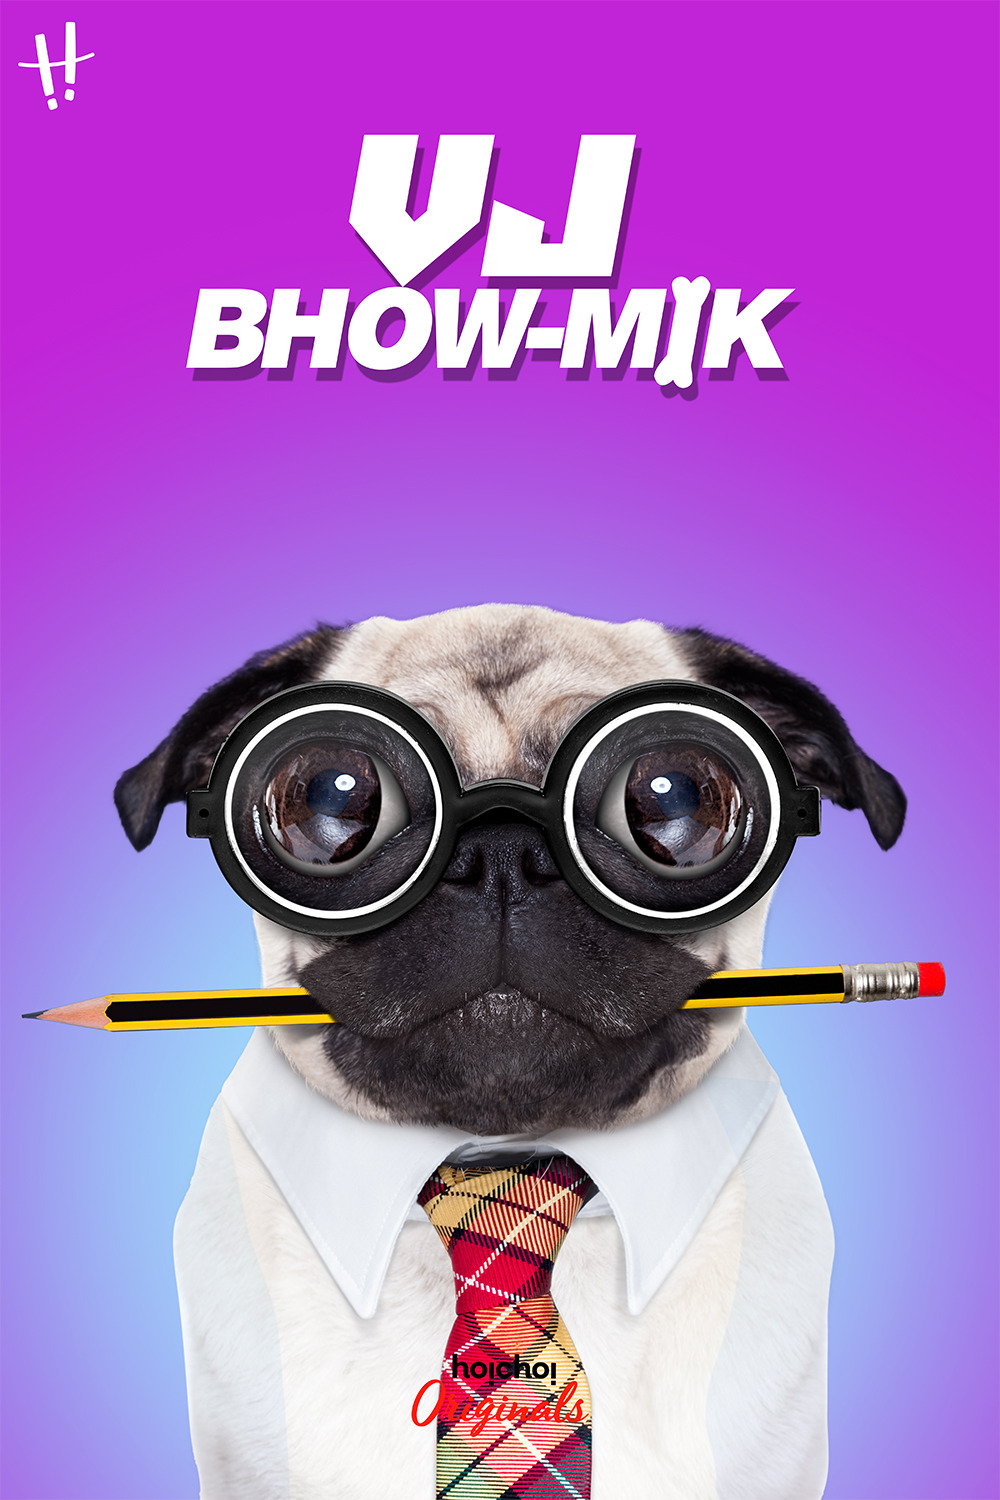 Extra Large TV Poster Image for VJ Bhow-mik 